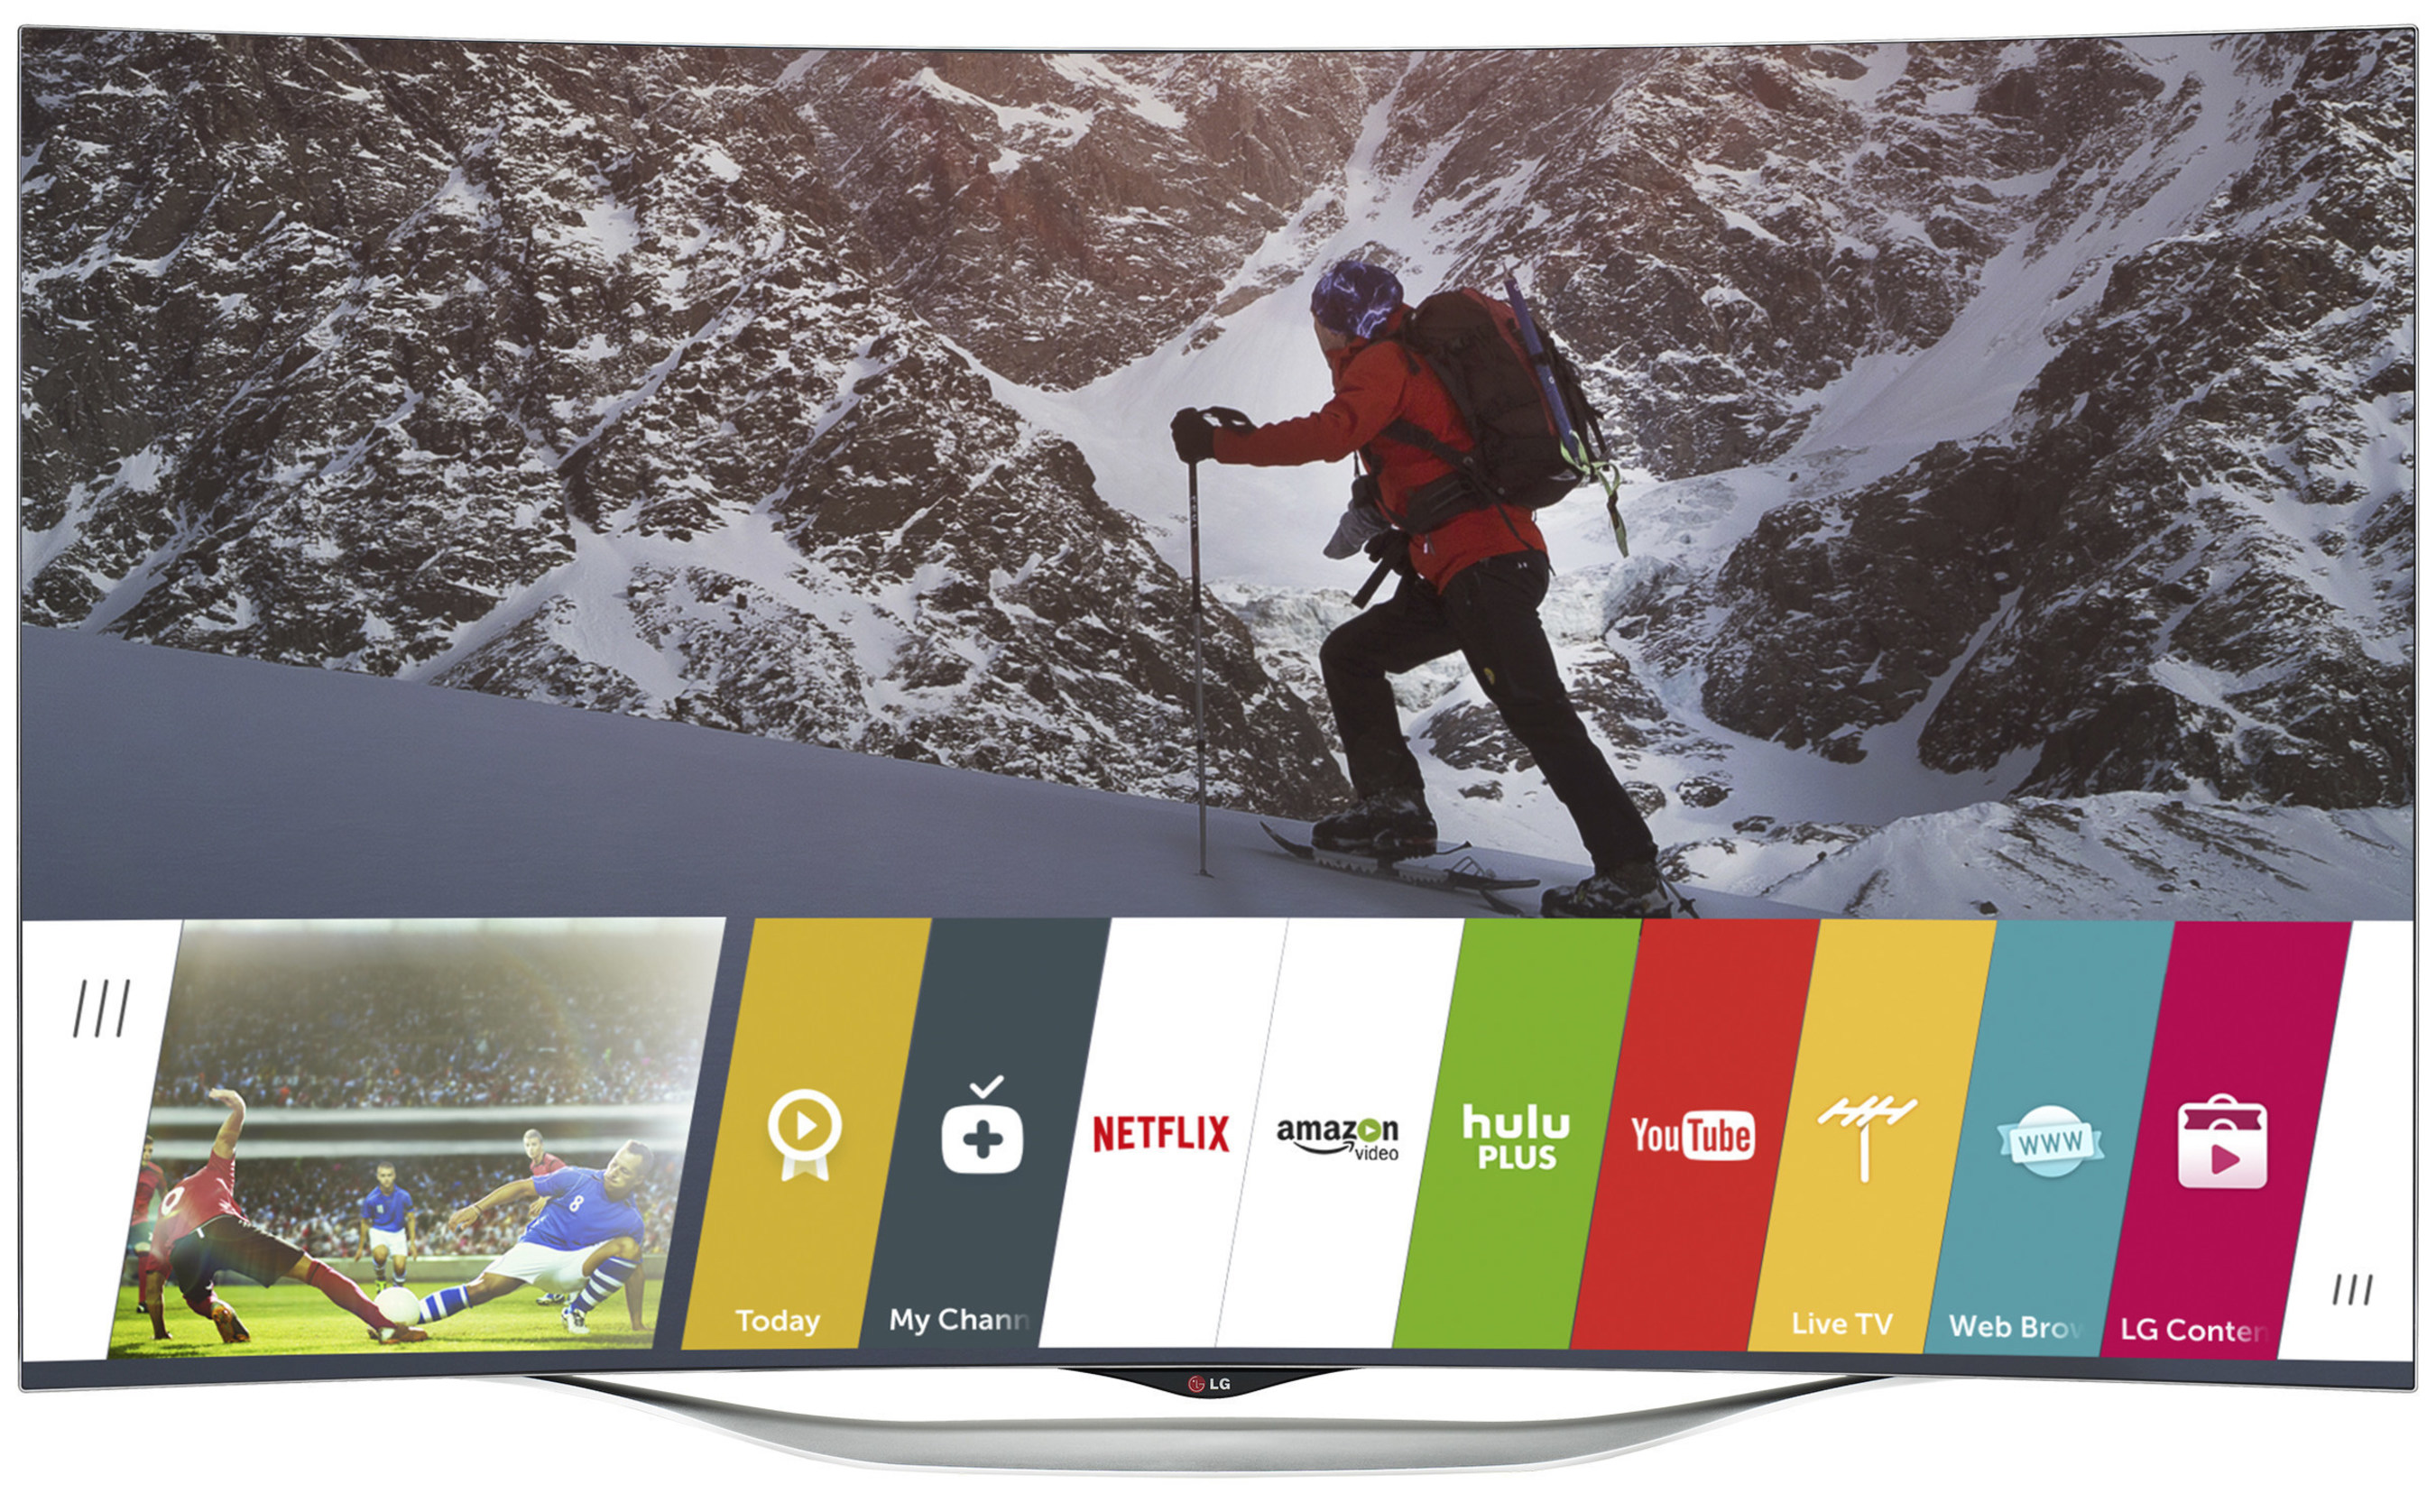 Erasure risk Minefield LG Adds Smart TV Content Partners, Provides Free Upgrade To 2014 webOS TVs  To Deliver Even More Choices And Speed